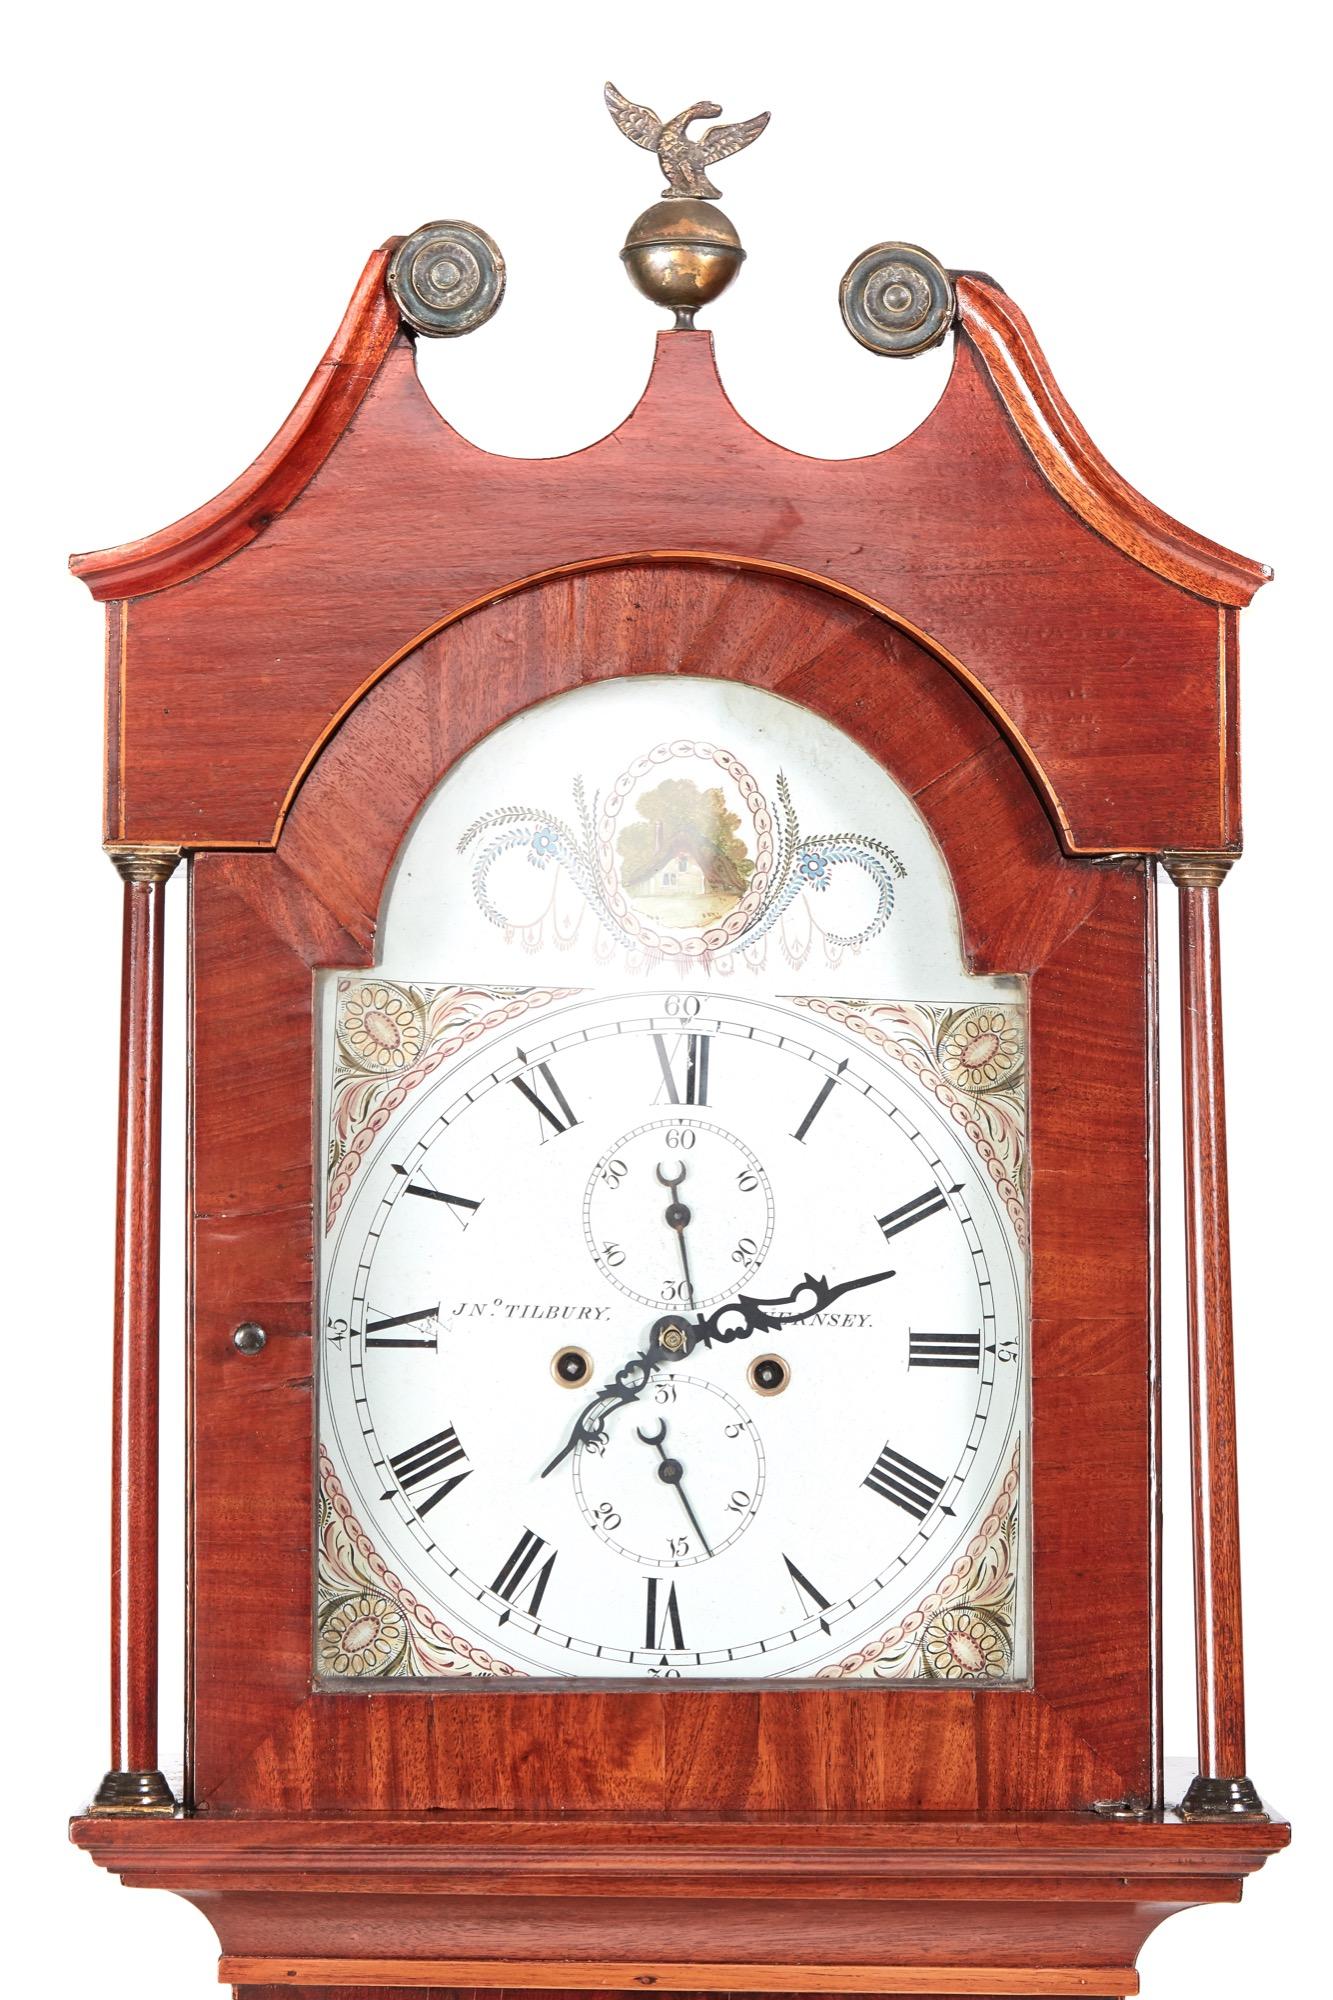 Antique mahogany 8 day longcase clock J N Tilbury Guernsey with a swan-neck pediment original brass finial, lovely decorative and colorful arched painted dial with date and seconds dial, 8 day duration mechanism striking the hour on a bell, lovely